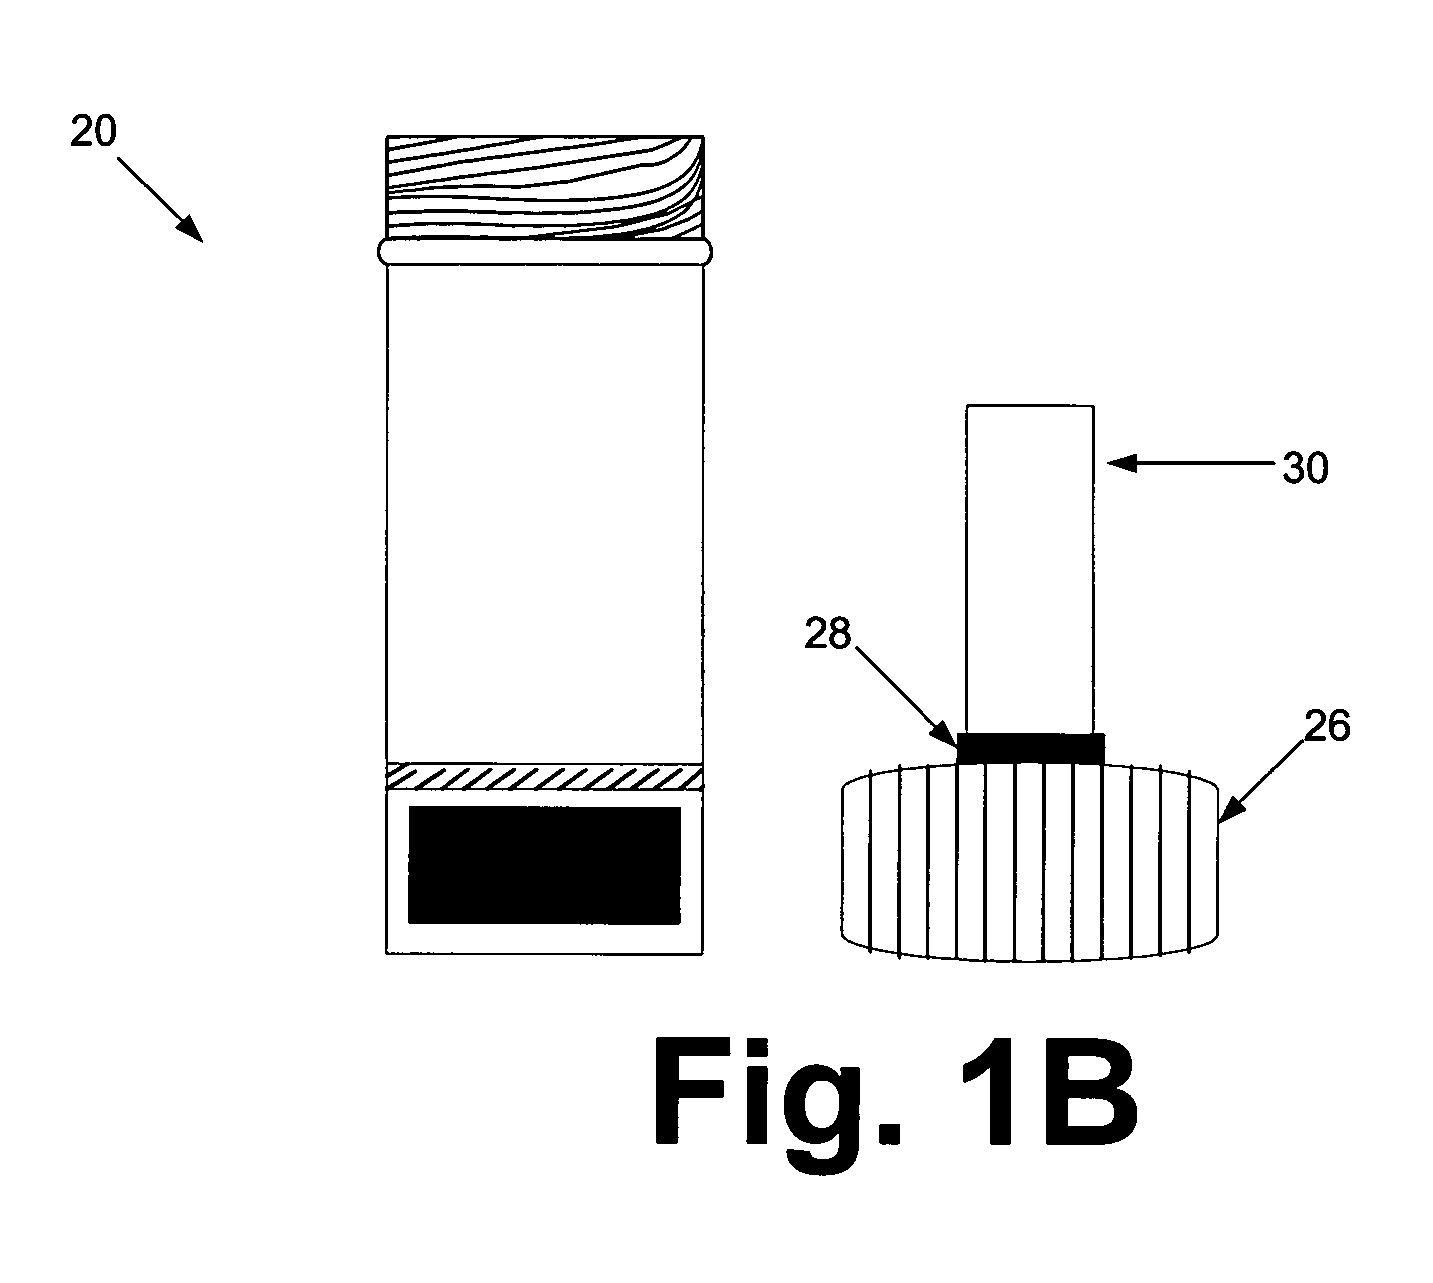 Devices and methods for collection, storage and transportation of biological specimens